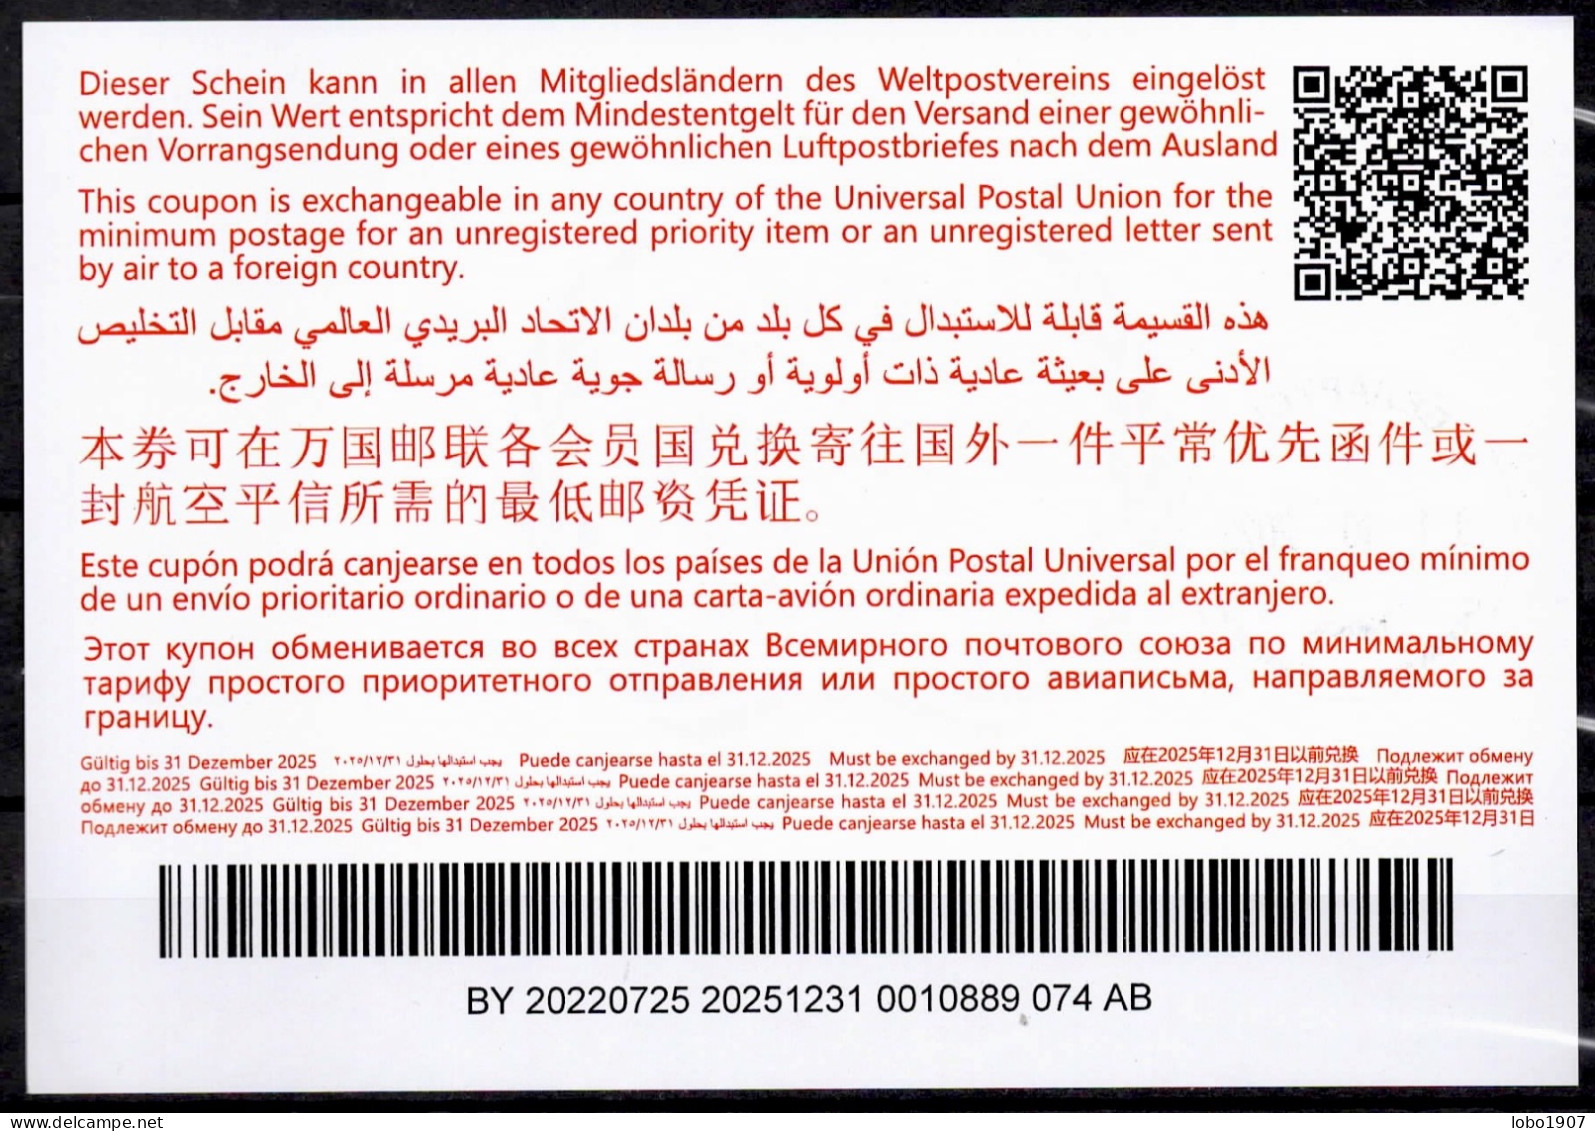 BELARUS  Abidjan Special Issue Ab49  20220725 AB  Int. Reply Coupon Reponse Antwortschein IRC IAS  MINSK 01.10.2022  FD! - Bielorussia